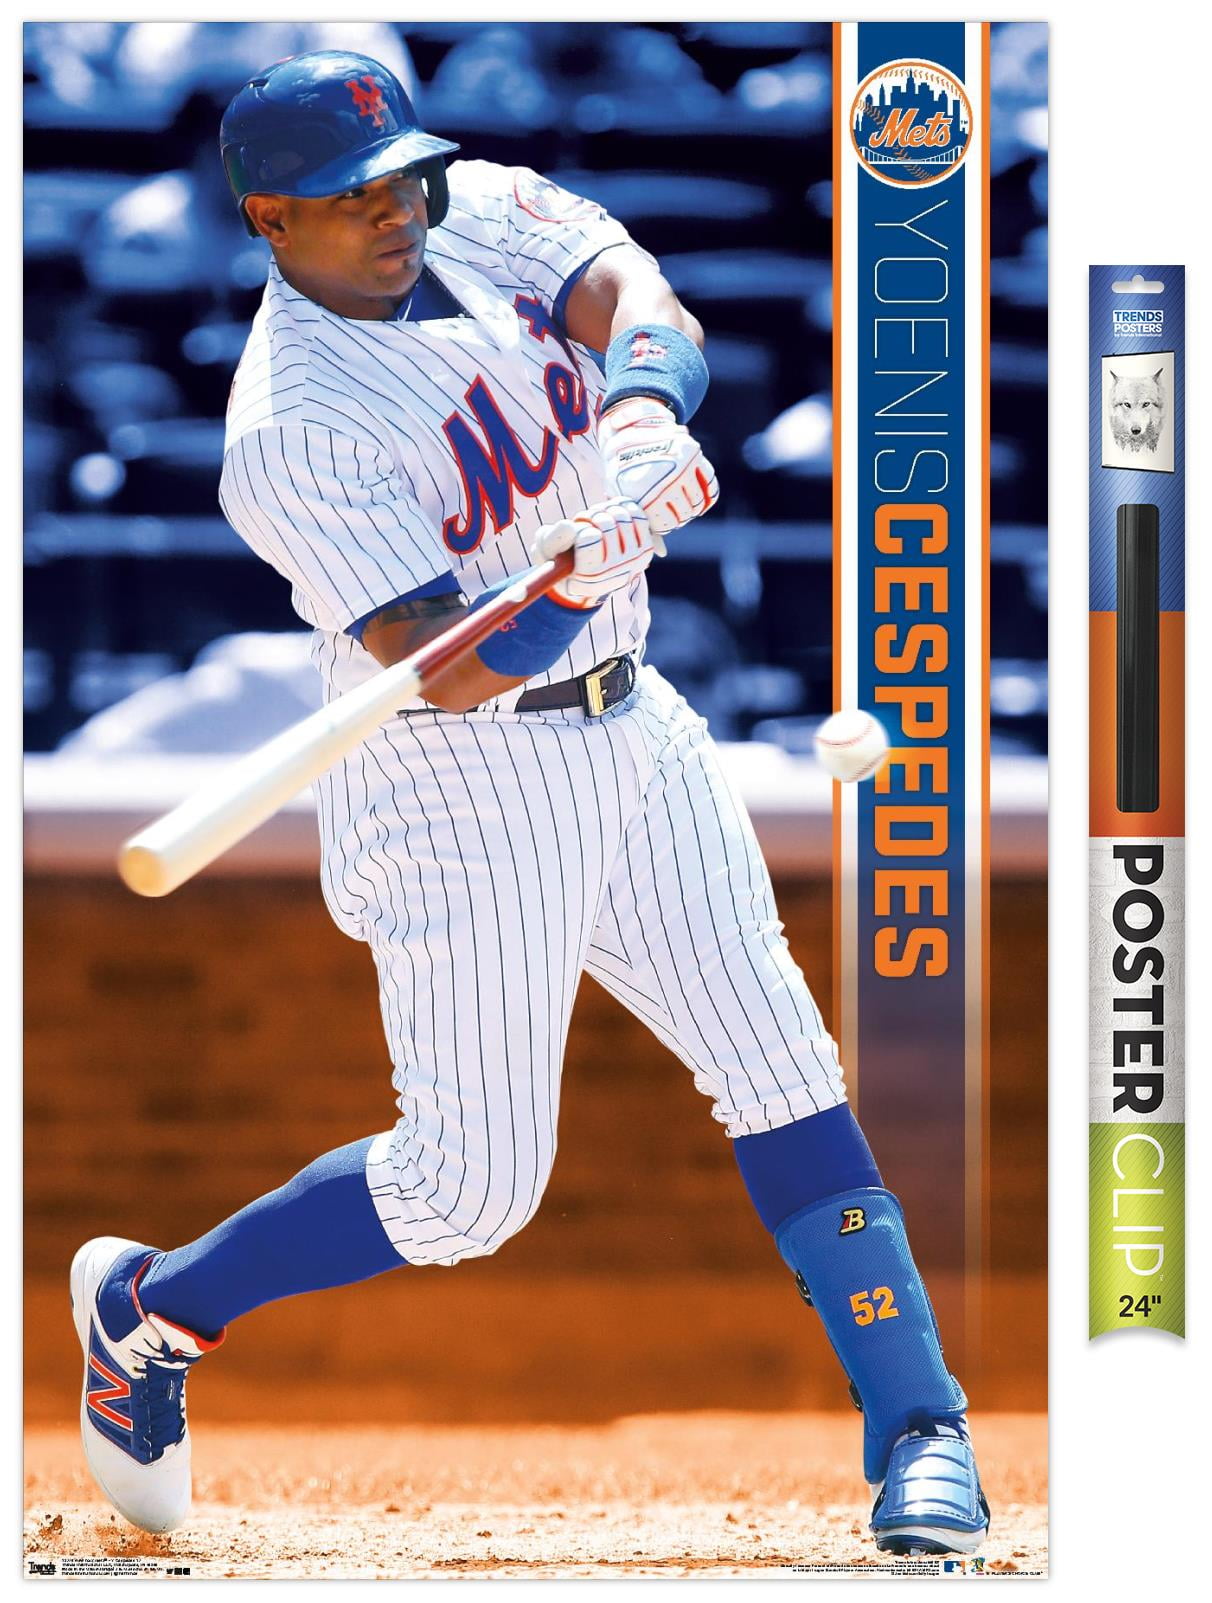 MLB New York Mets - Yoenis Cespedes 17 22.37 in x 34 in Poster, by Trends International